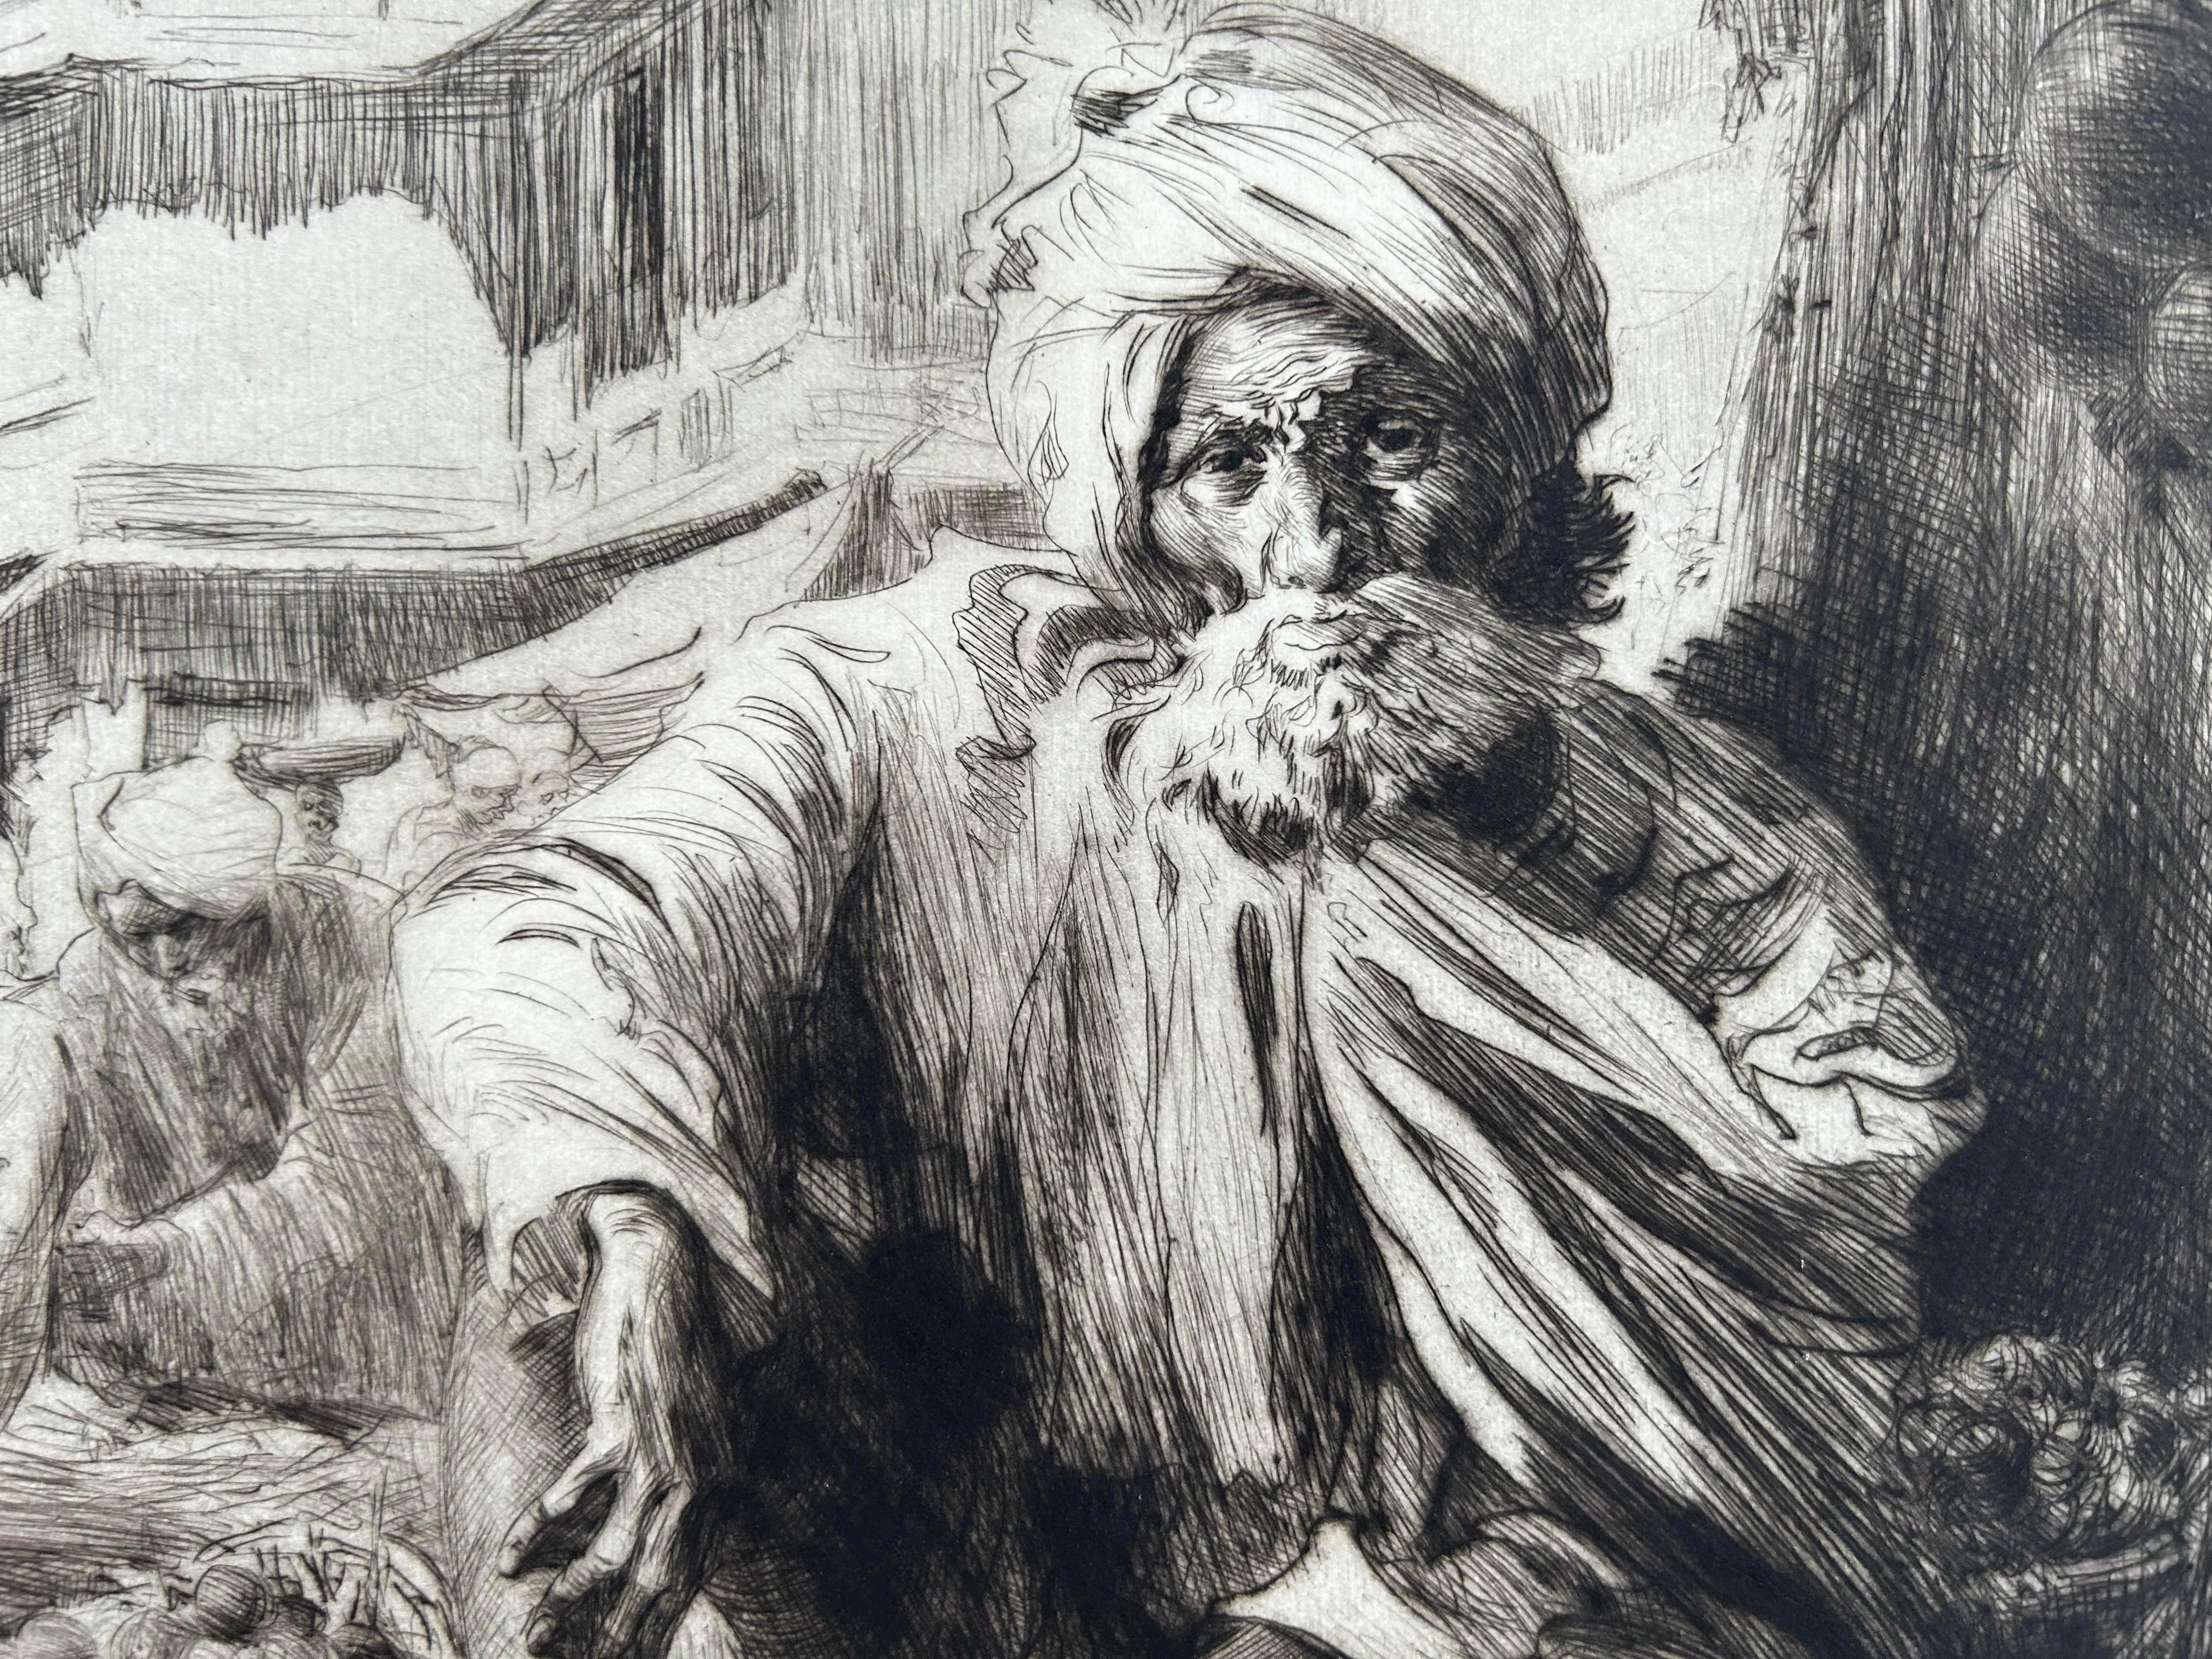 
Artist: William Bagdatopoulos
In the Bazaar, Bijapur, c 1929
Medium: Engraving
Edition 25/75
Image Size: 21 x 30 cm
Paper Size: 29 x40  cm

A fabulous and very rare image. There is one in the Smithsonian Collections

William Spencer Bagdatopoulos